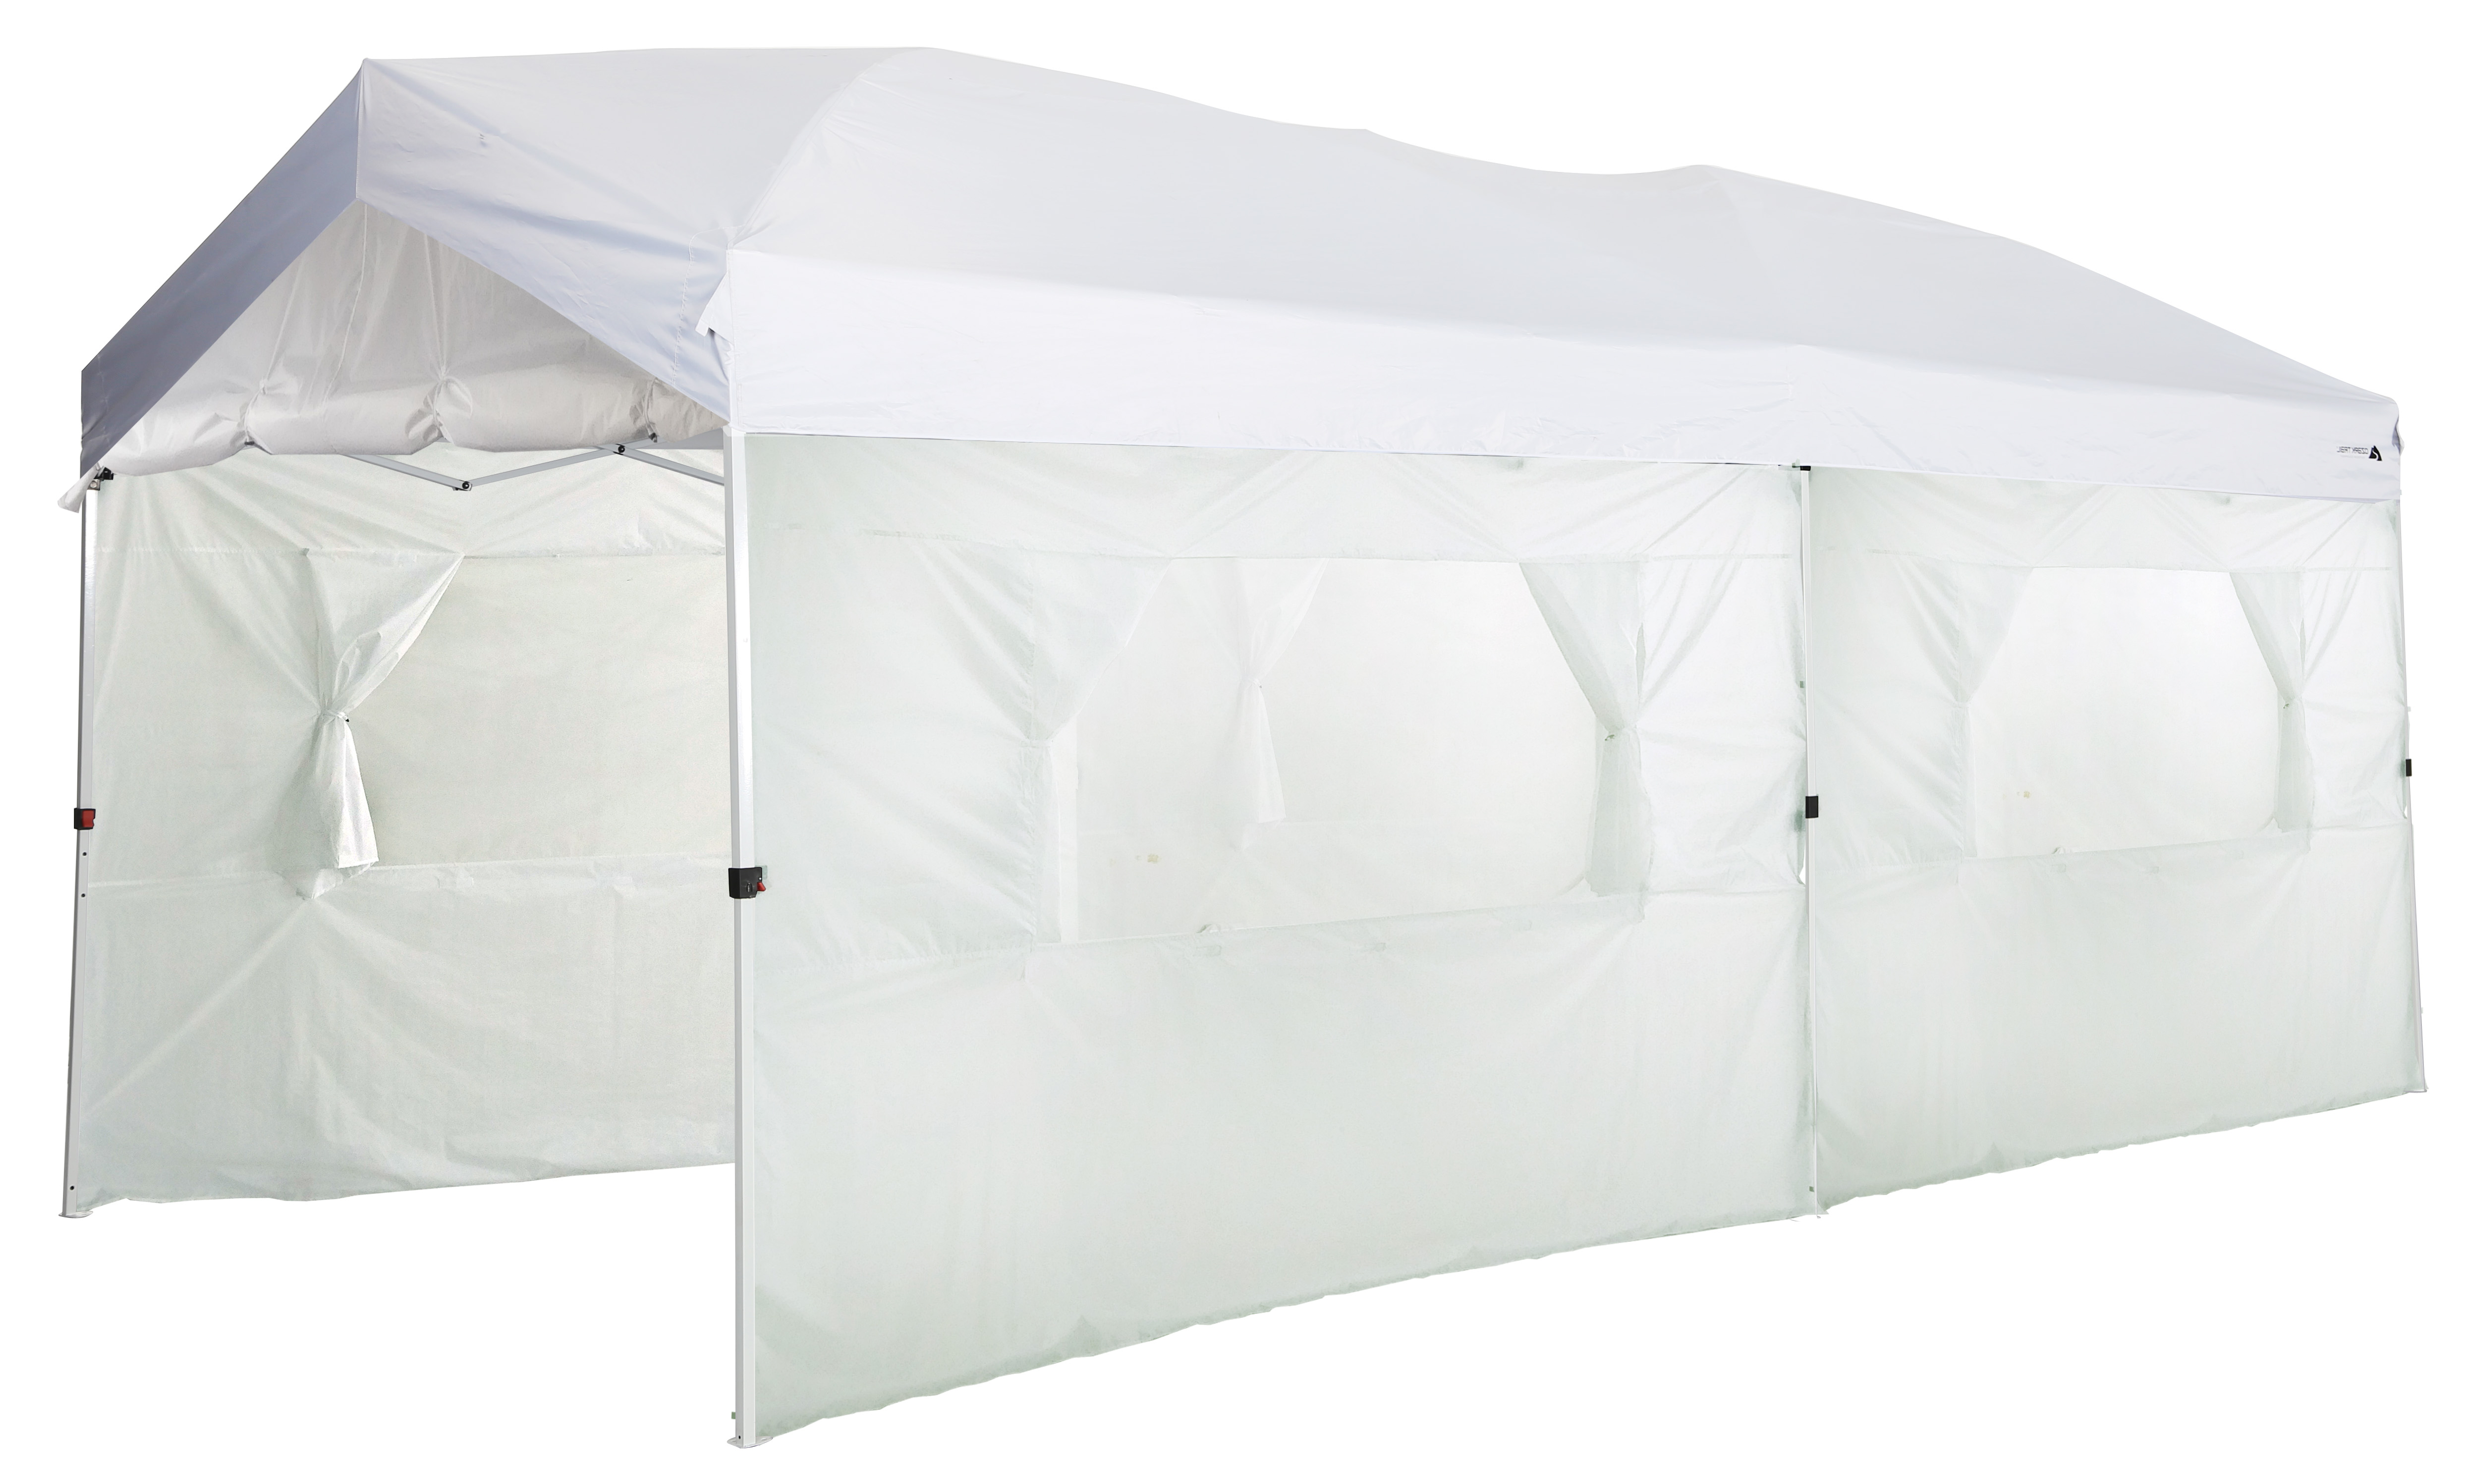 Ozark Trail 10x20 Straight Leg Instant Canopy - Includes Carry Bag, 6 Sidewalls, Stakes, and Tie Out Lines - image 1 of 13